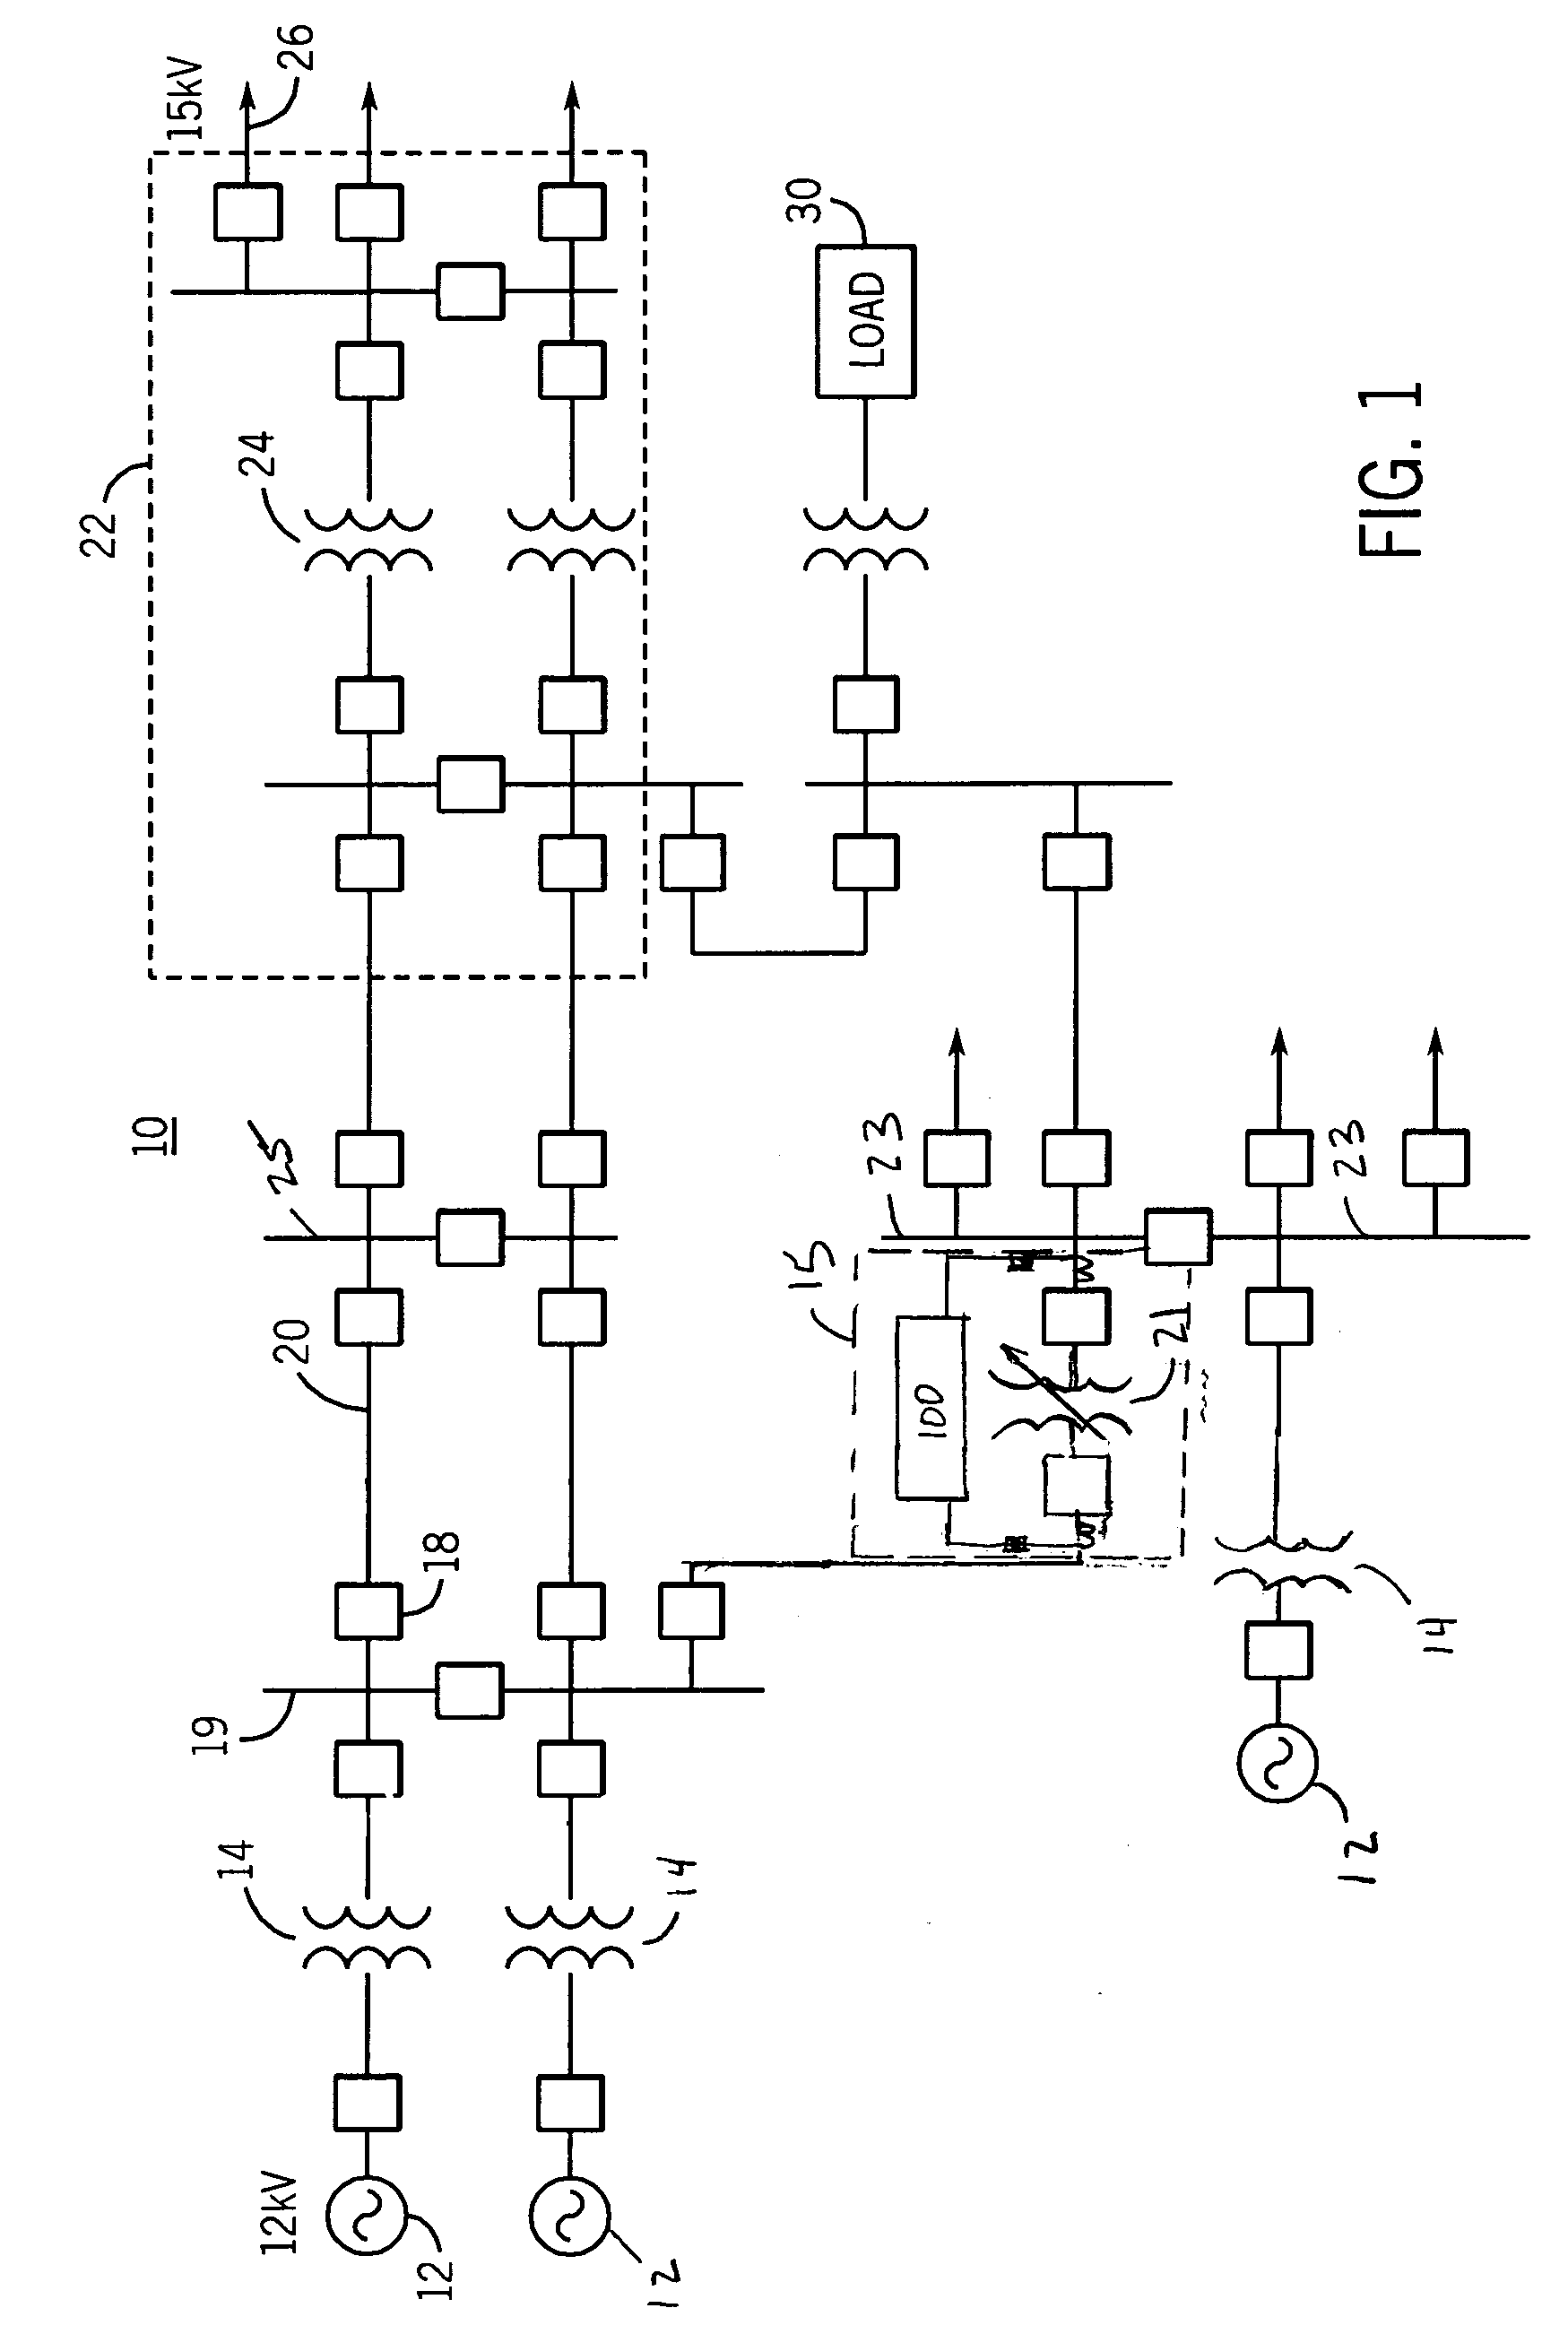 Apparatus and method for providing differential protection for a phase angle regulating transformer in a power system